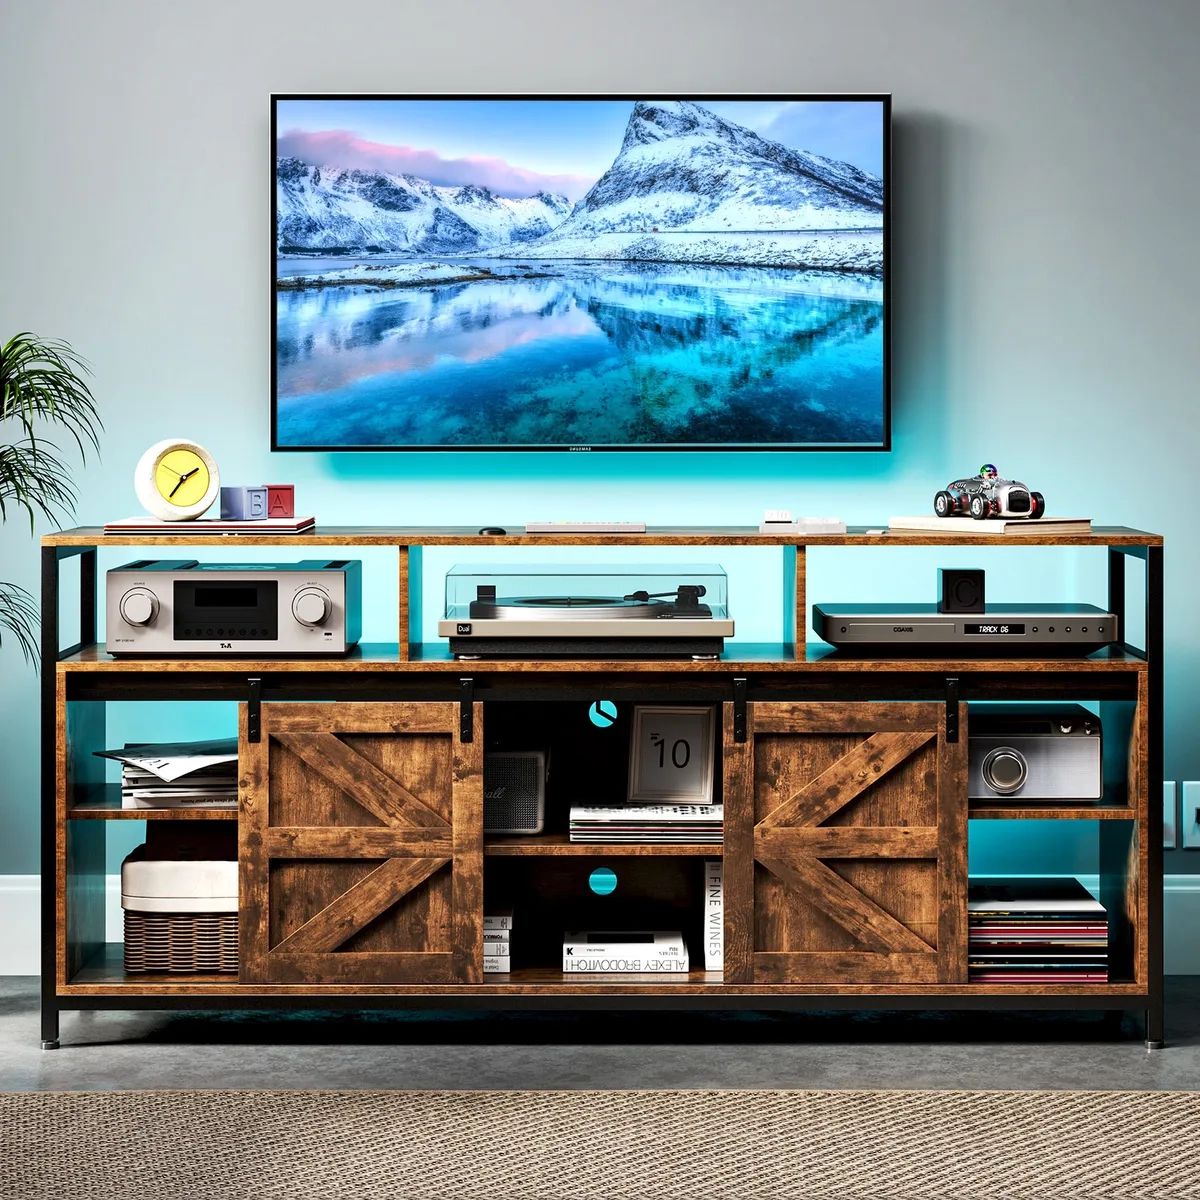 Tc Homeny Tv Stand With Power Station + Rgb Led Tv Cabinet Entertainment  Center | Ebay Within Rgb Tv Entertainment Centers (View 4 of 15)